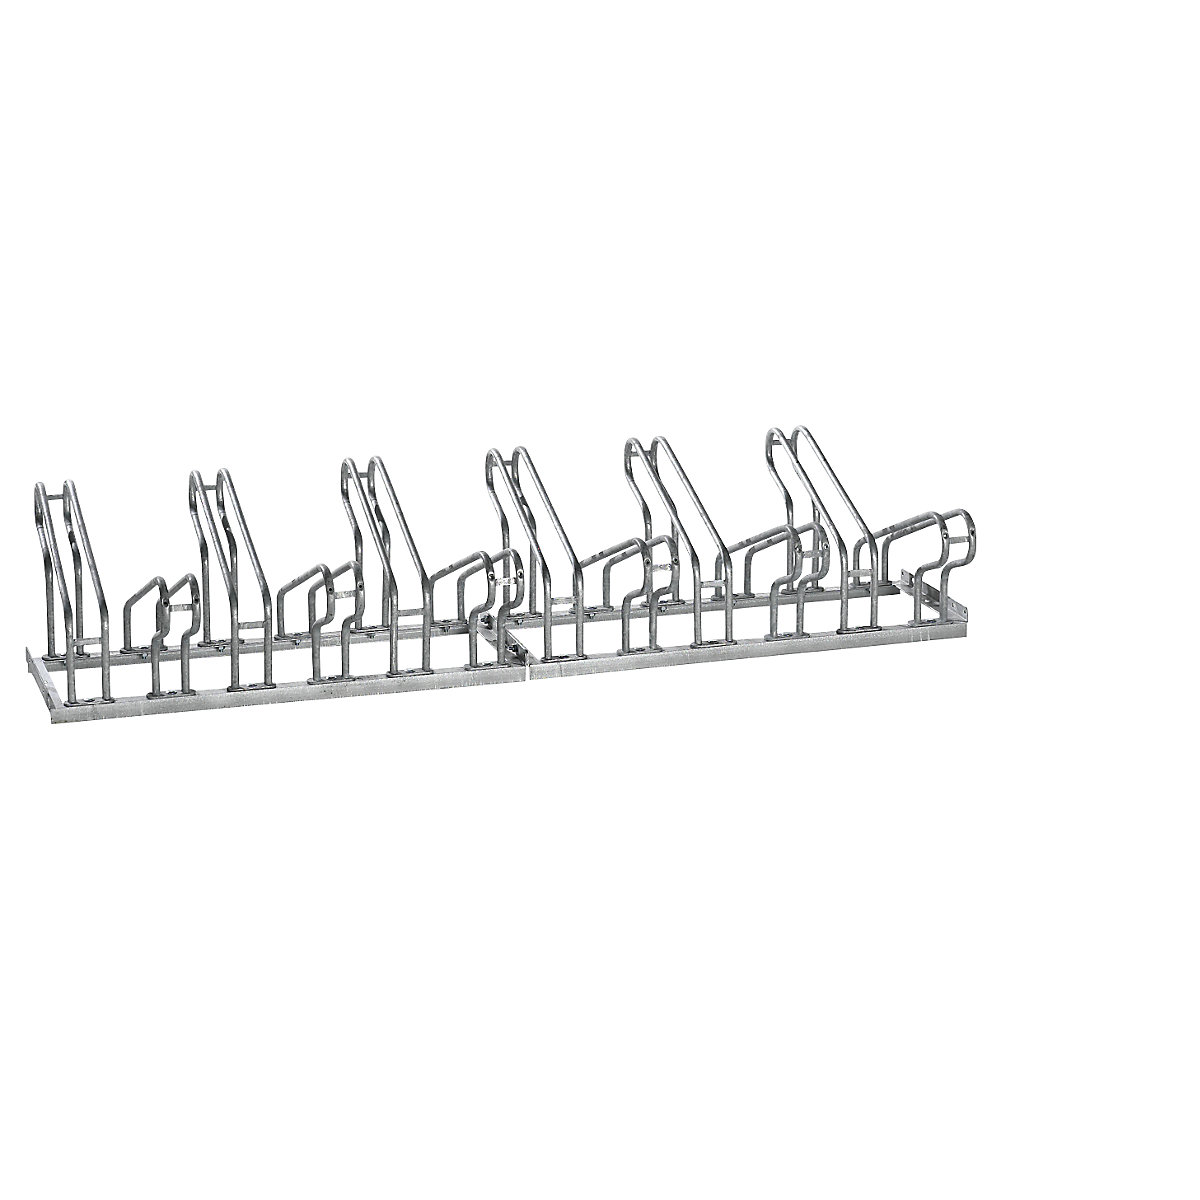 Bicycle rack, for double-sided shelter, with 24 parking spaces